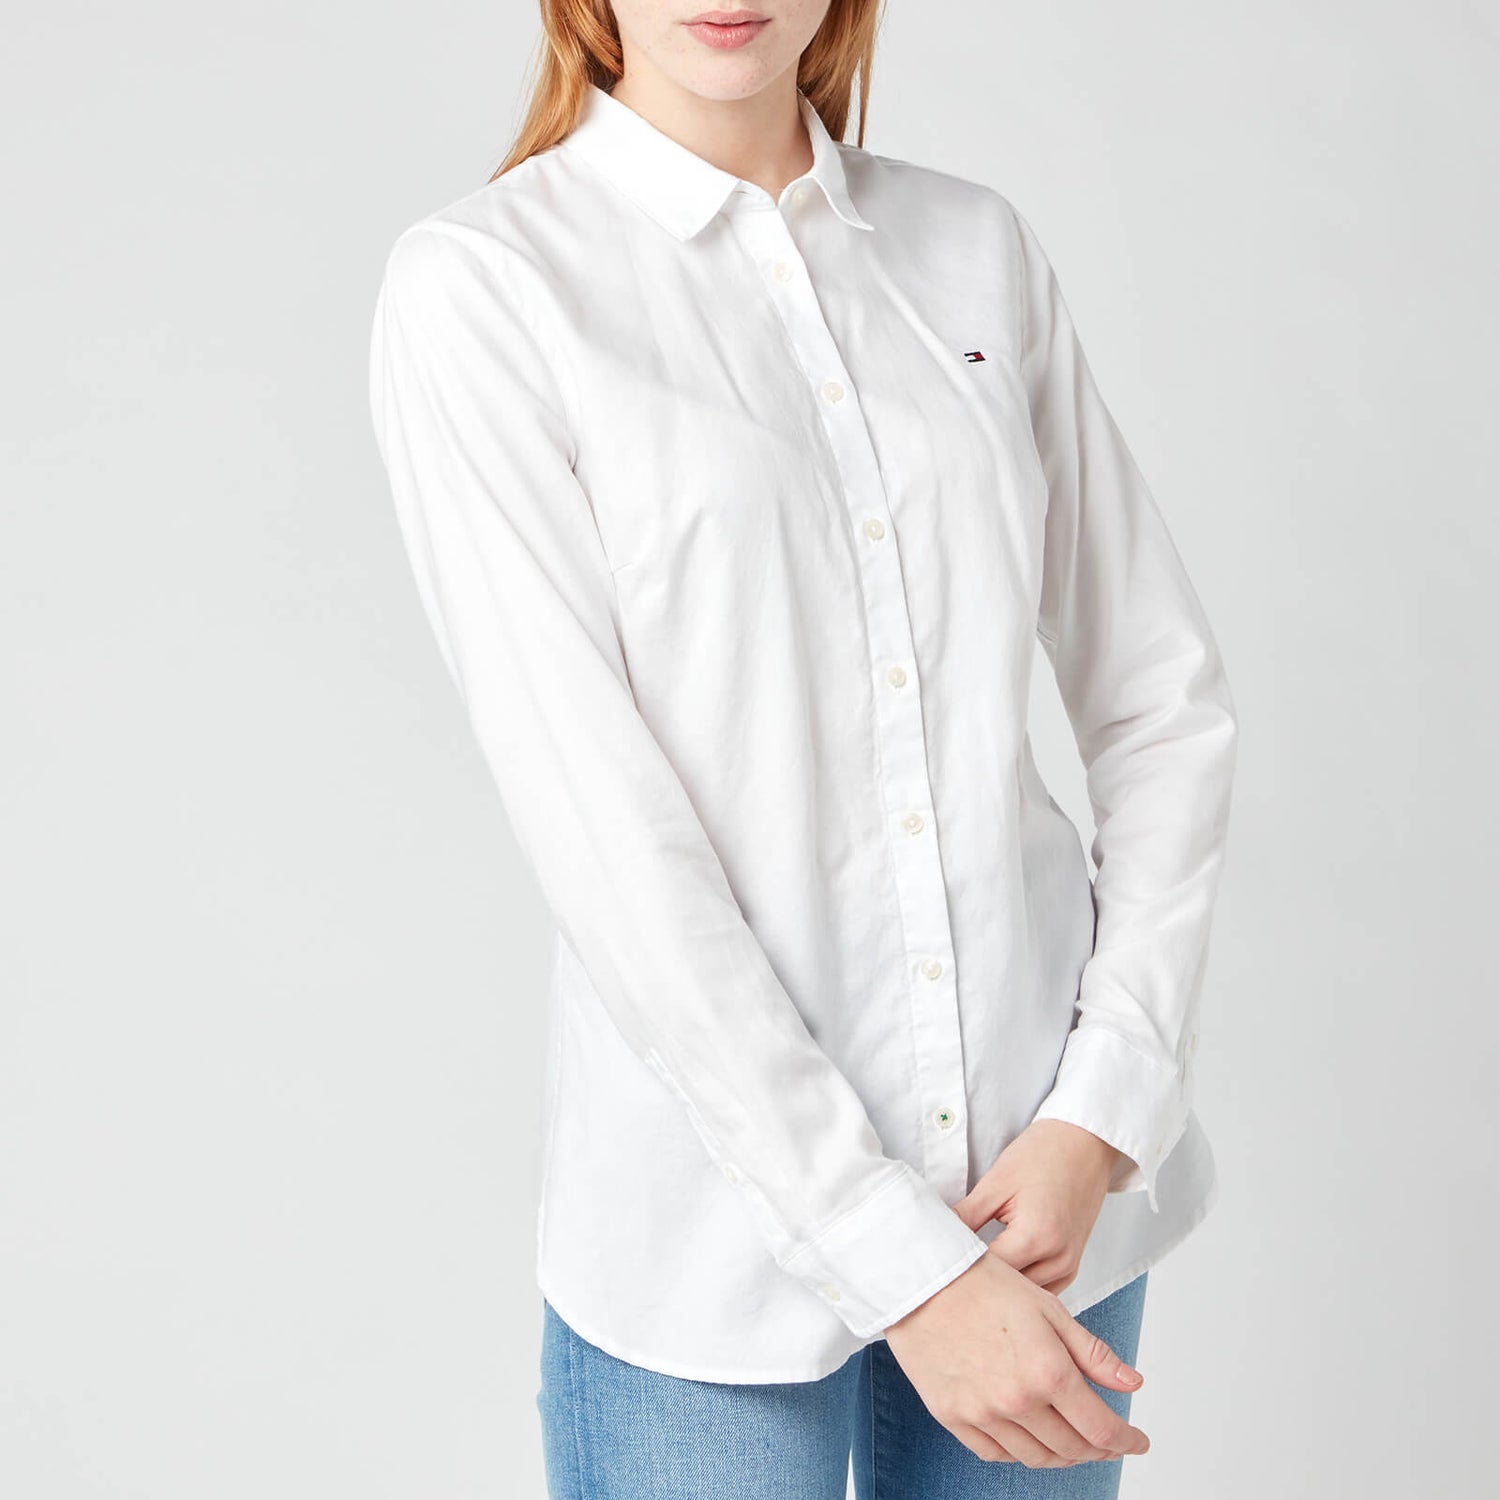 Tommy Hilfiger Women's Heritage Regular Fit Shirt - Classic White